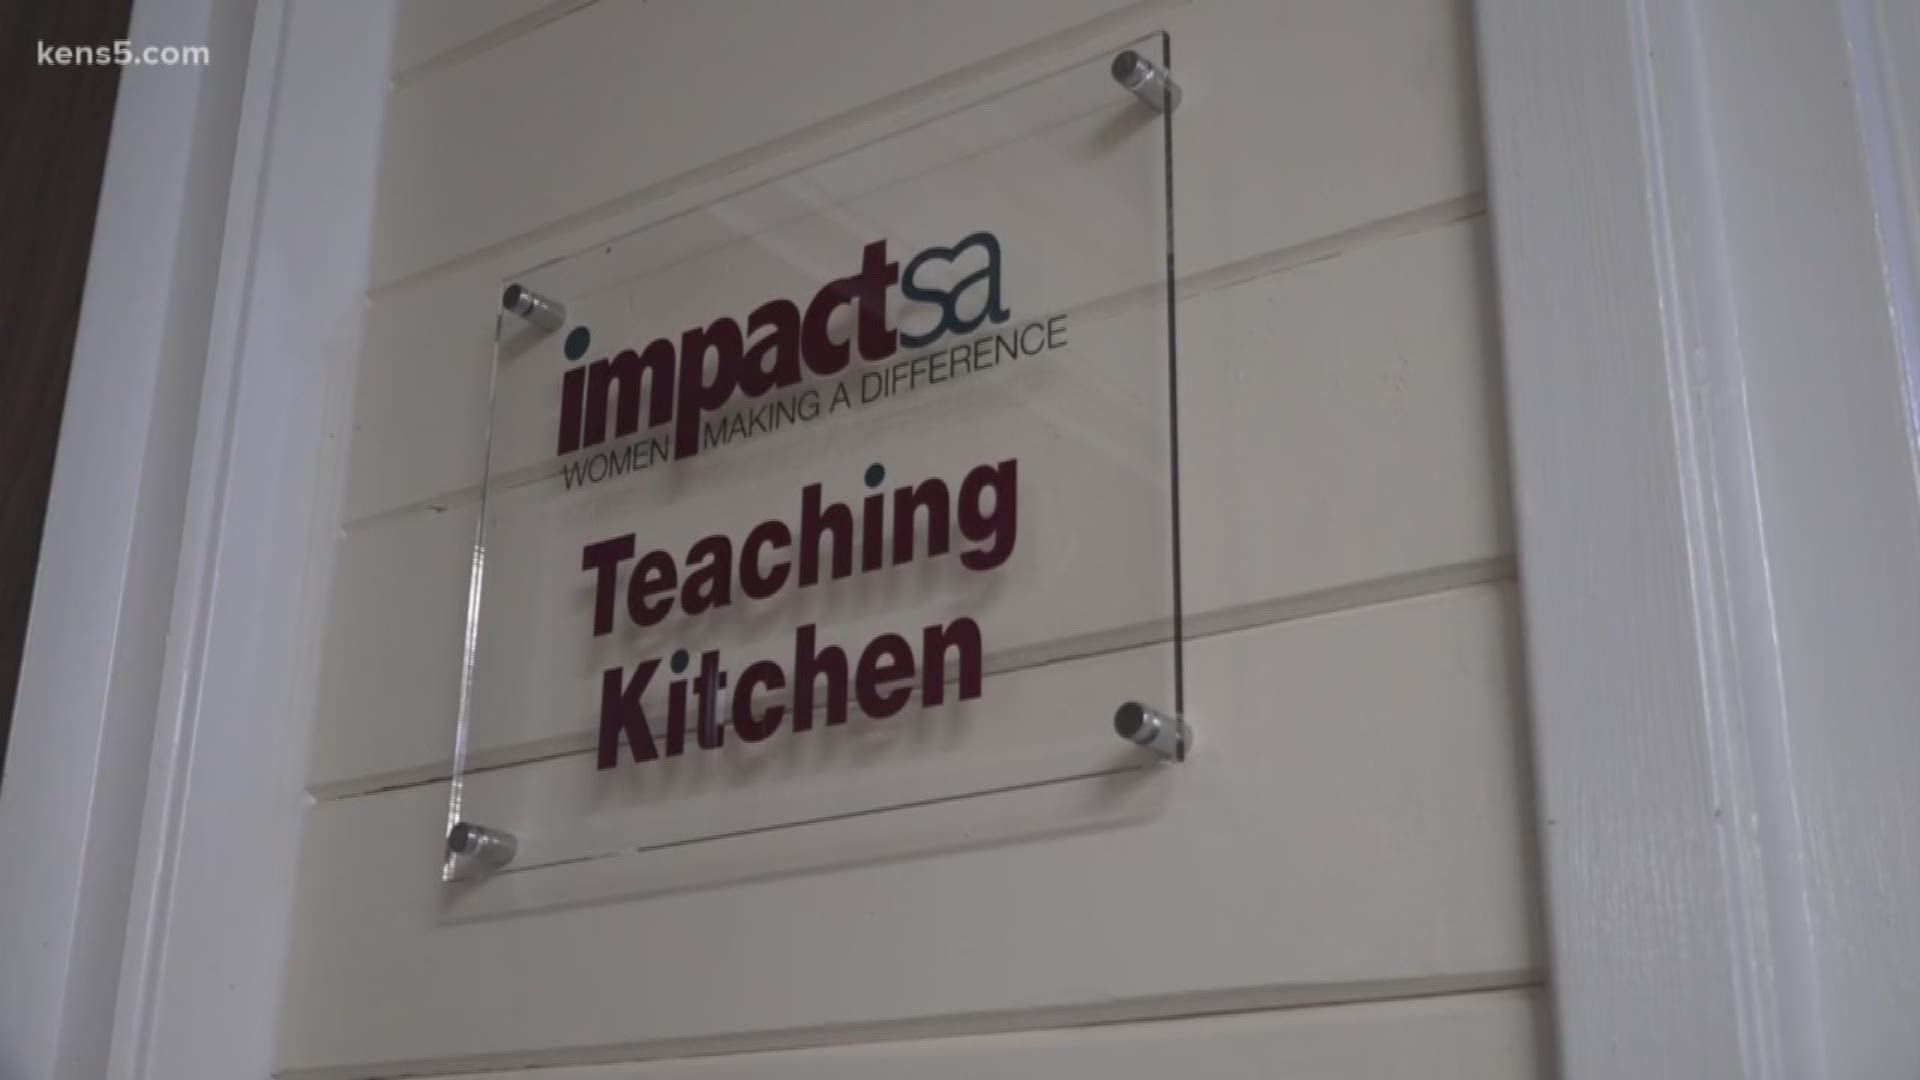 Roy Maas Youth Alternatives opened its new 'La Puerta' shelter, which helps children and teens who've faced trauma including sex trafficking, in January. But with limited funding, the nonprofit was not able to fix up a kitchen in the building -- until a $100,000 grant from Impact San Antonio came through.